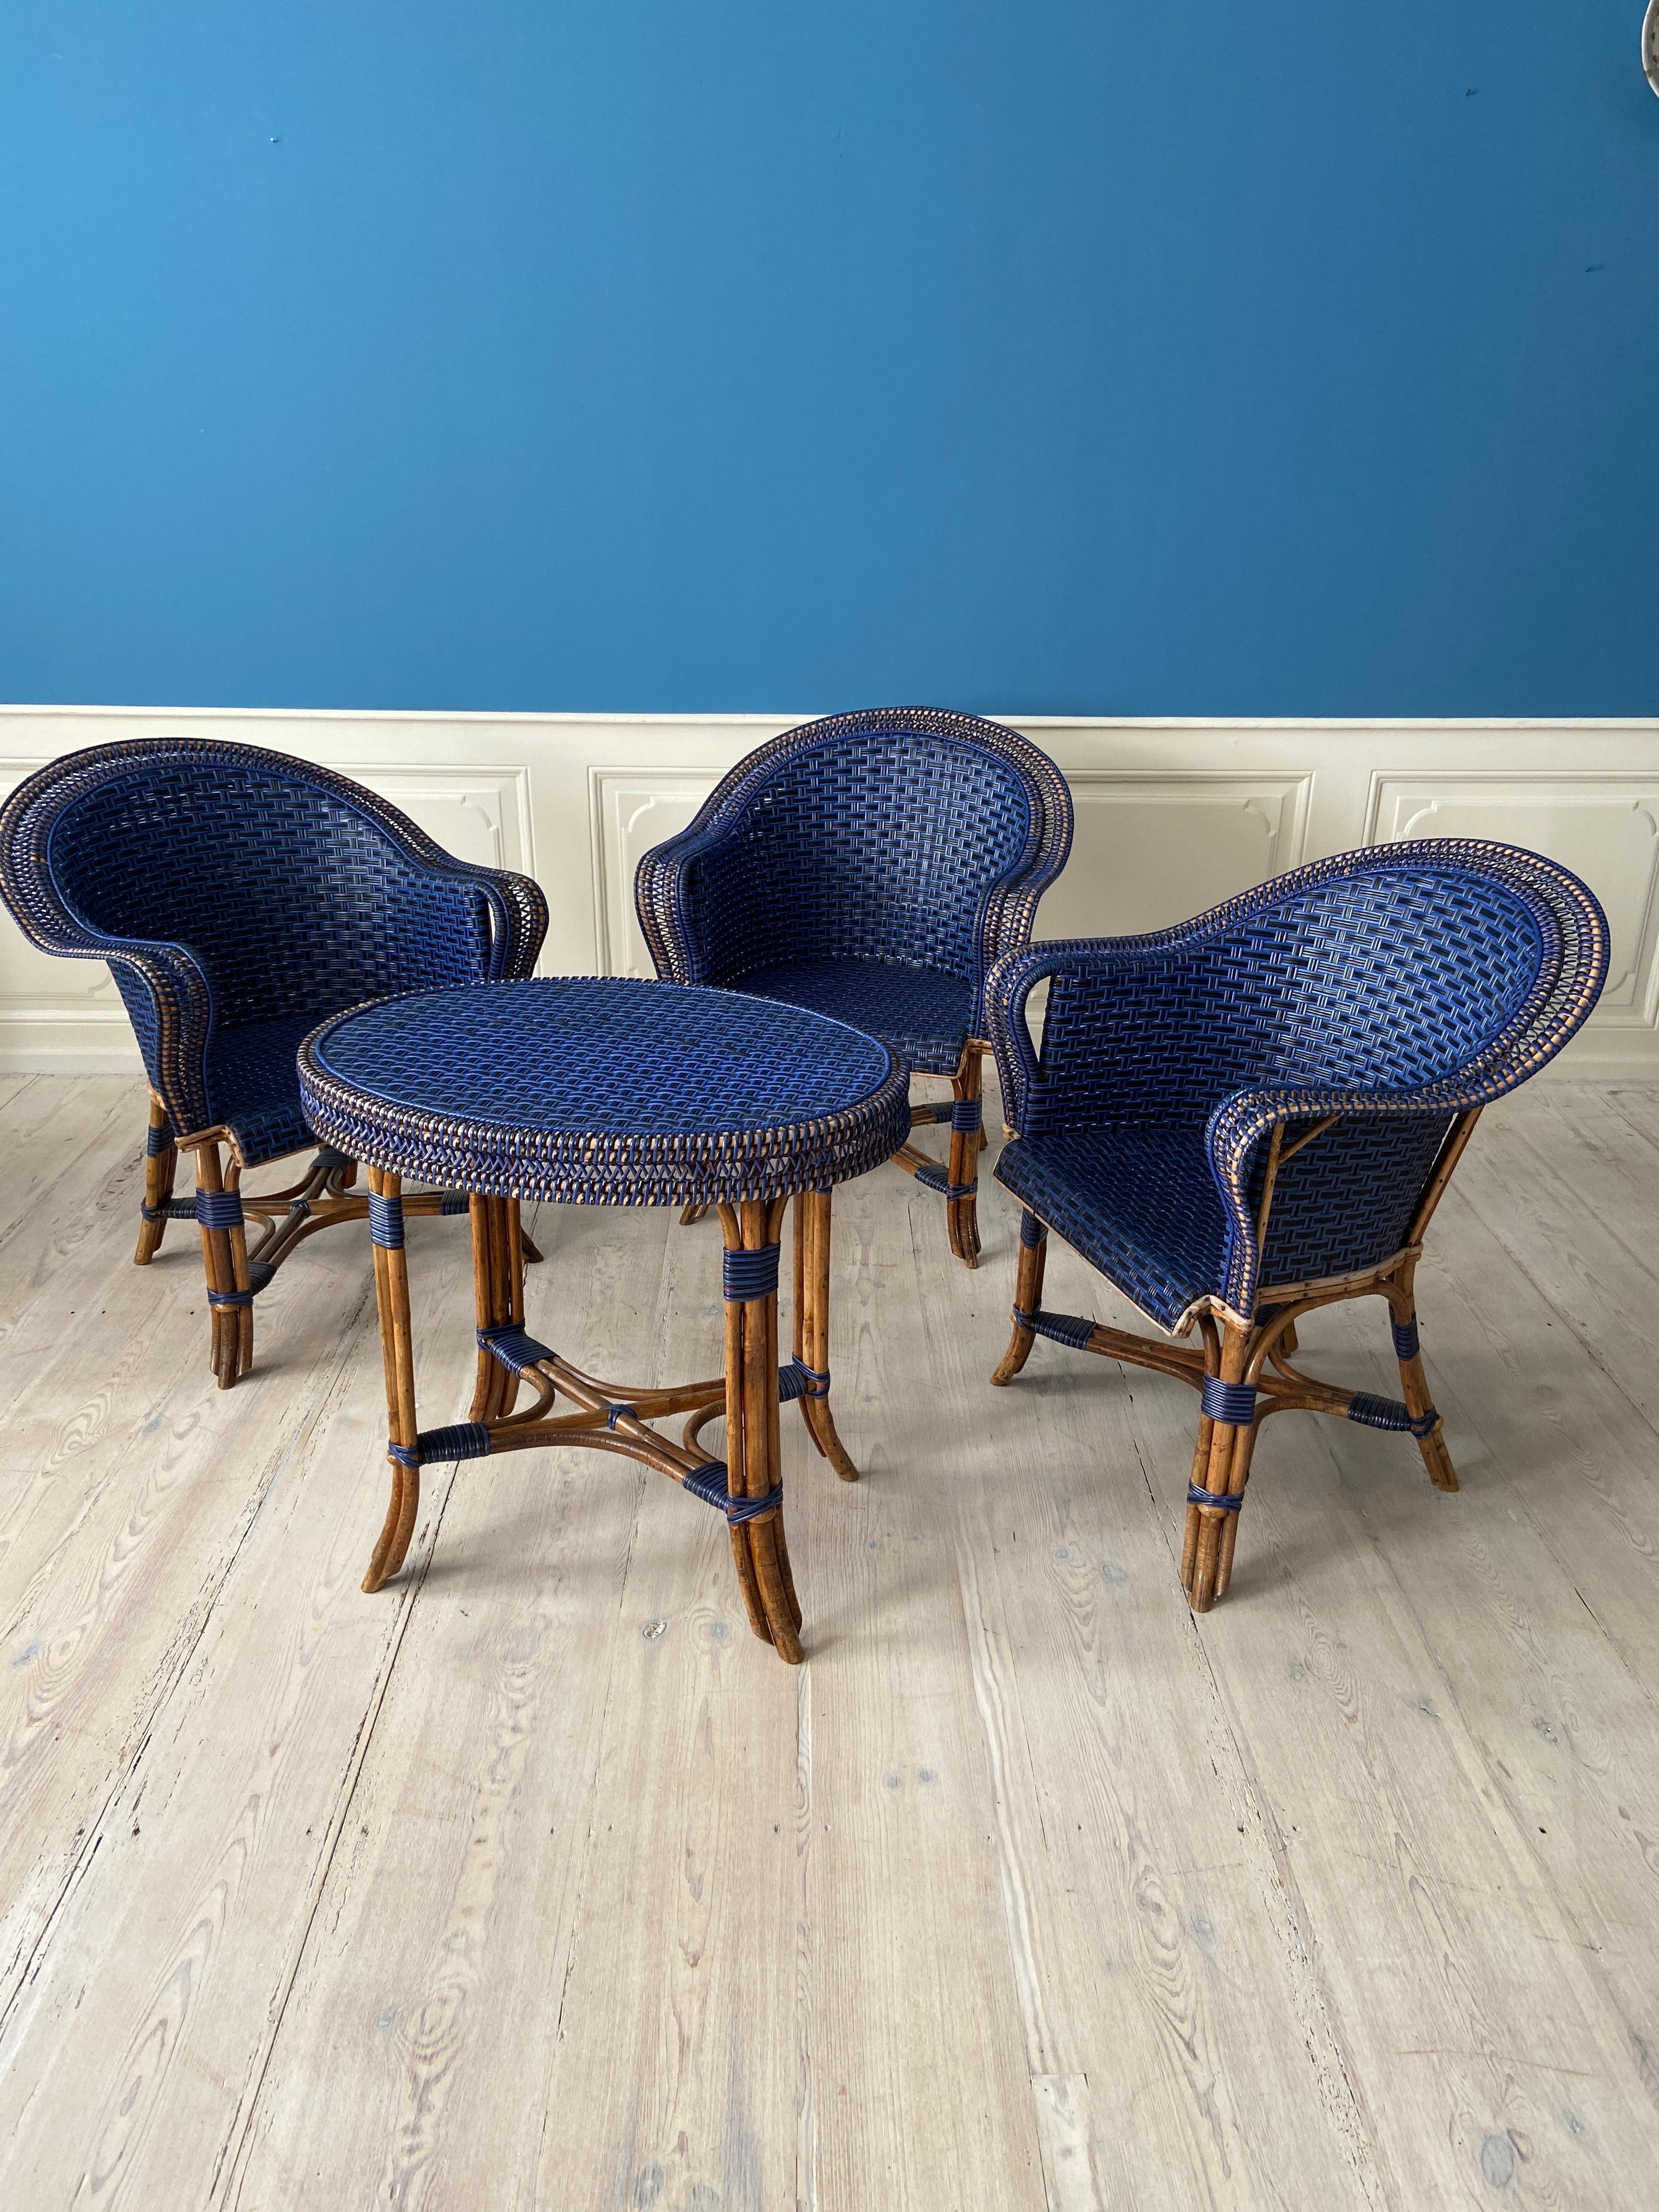 French Vintage Complete Rattan Furniture Set in Black and Blue, France, 20th Century For Sale